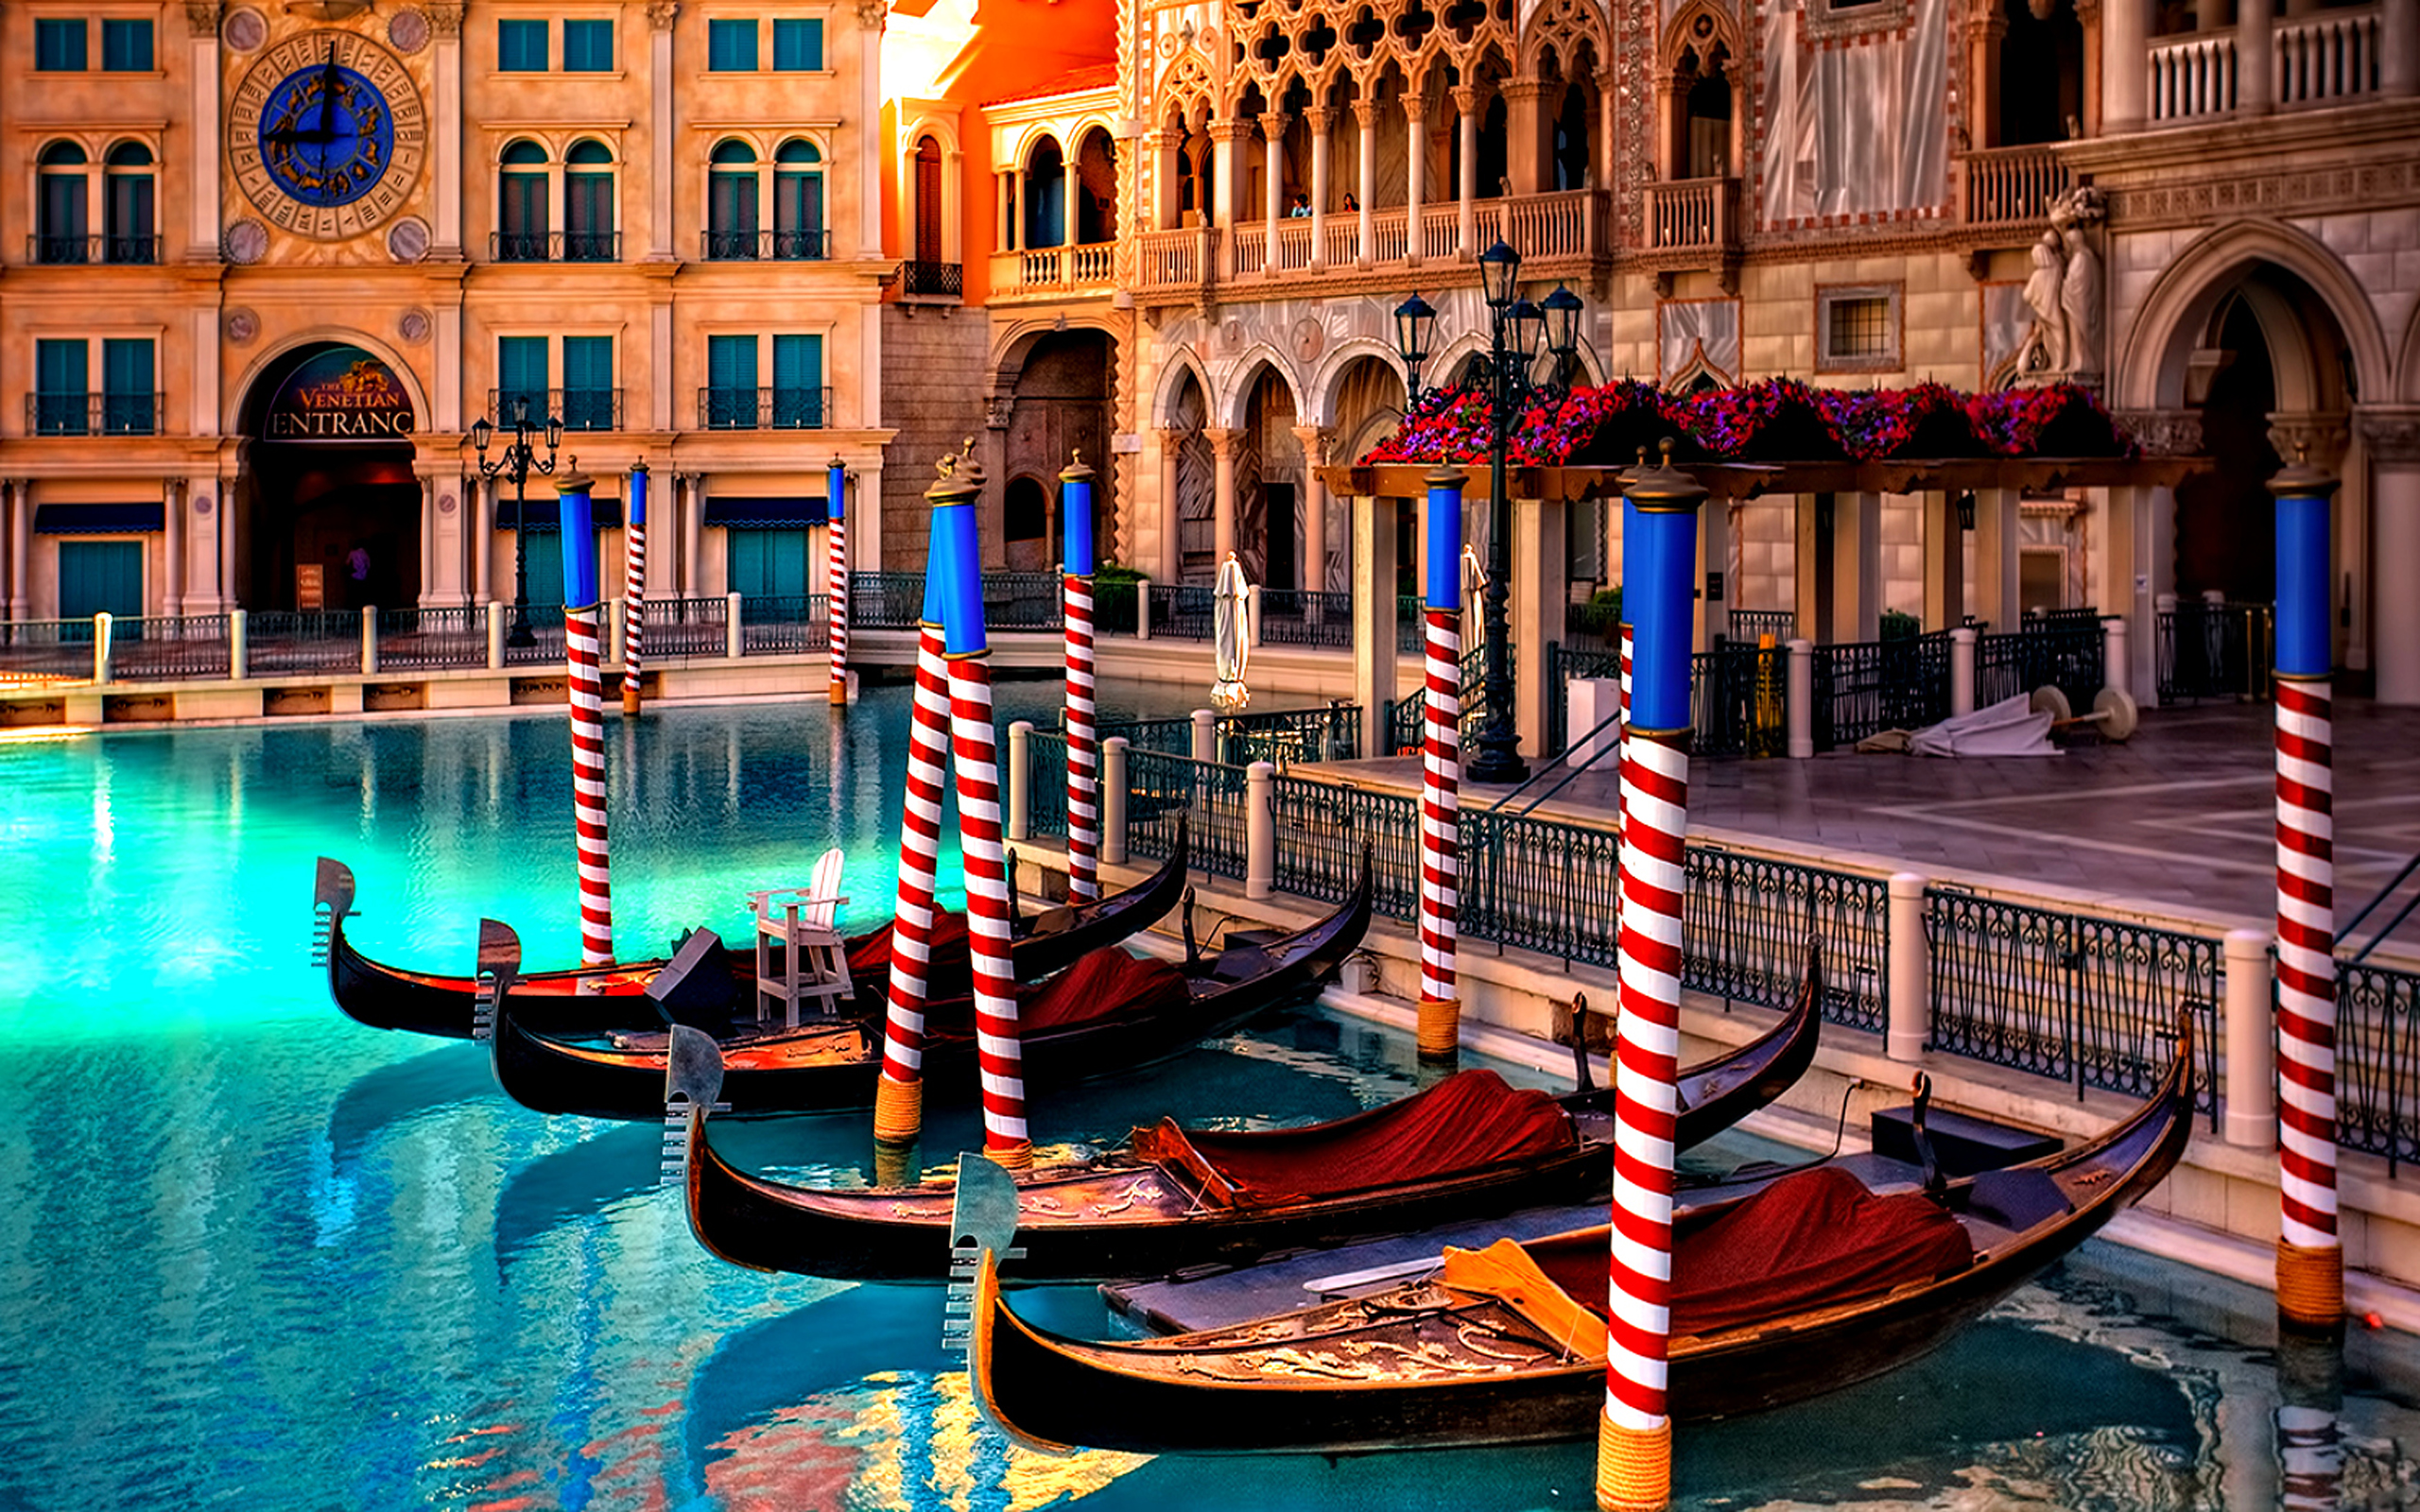 italy, water, architecture, vehicles, gondola, building, grand canal, venice